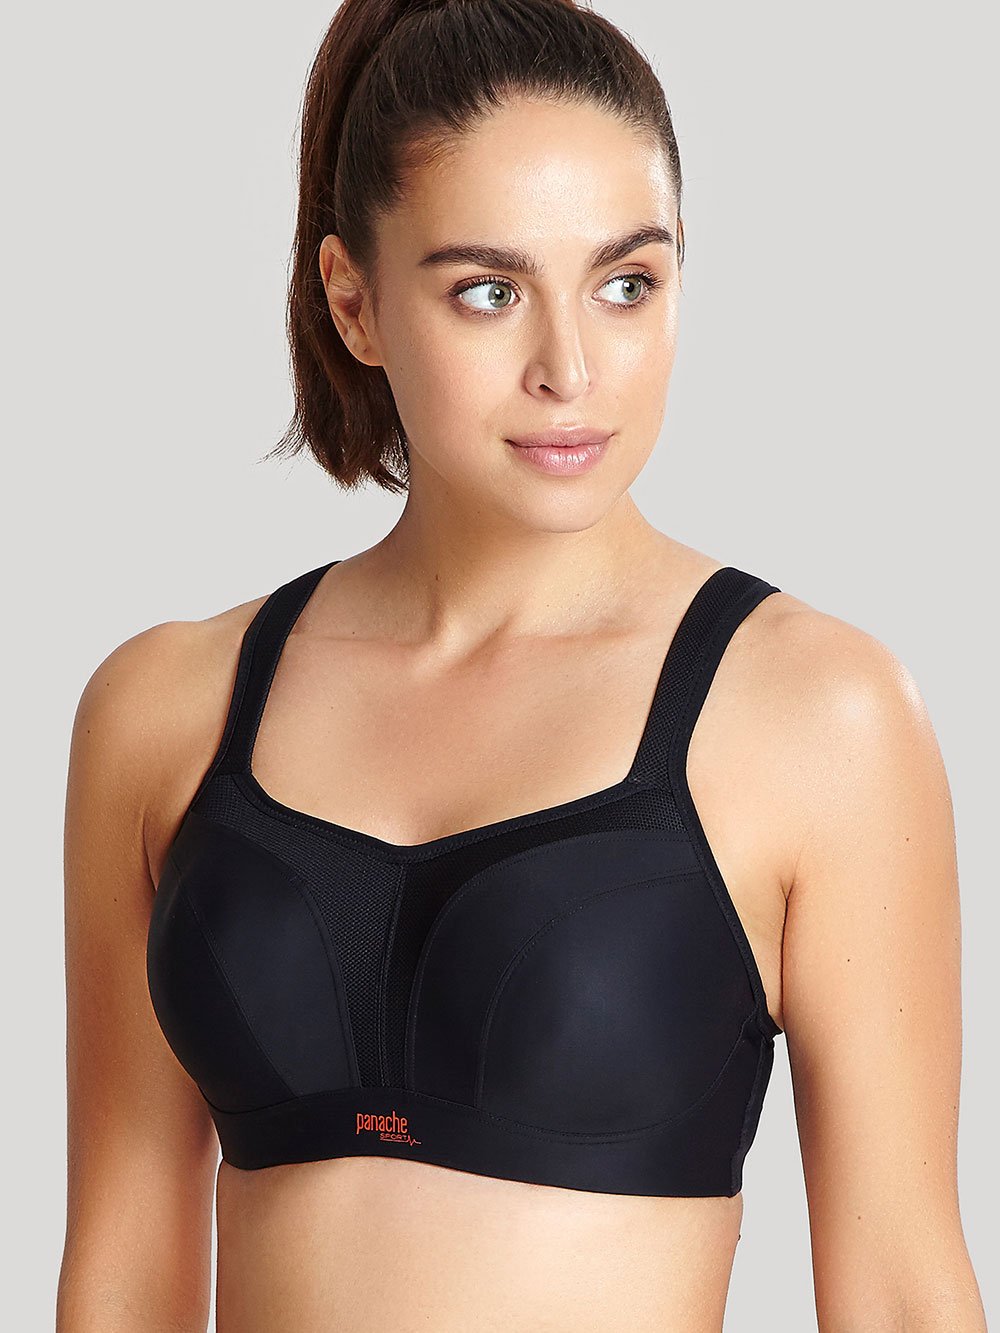 D Cup Bra: Bras for D Cup Boobs and Breast Size Etiquetado Sports Bras -  HauteFlair